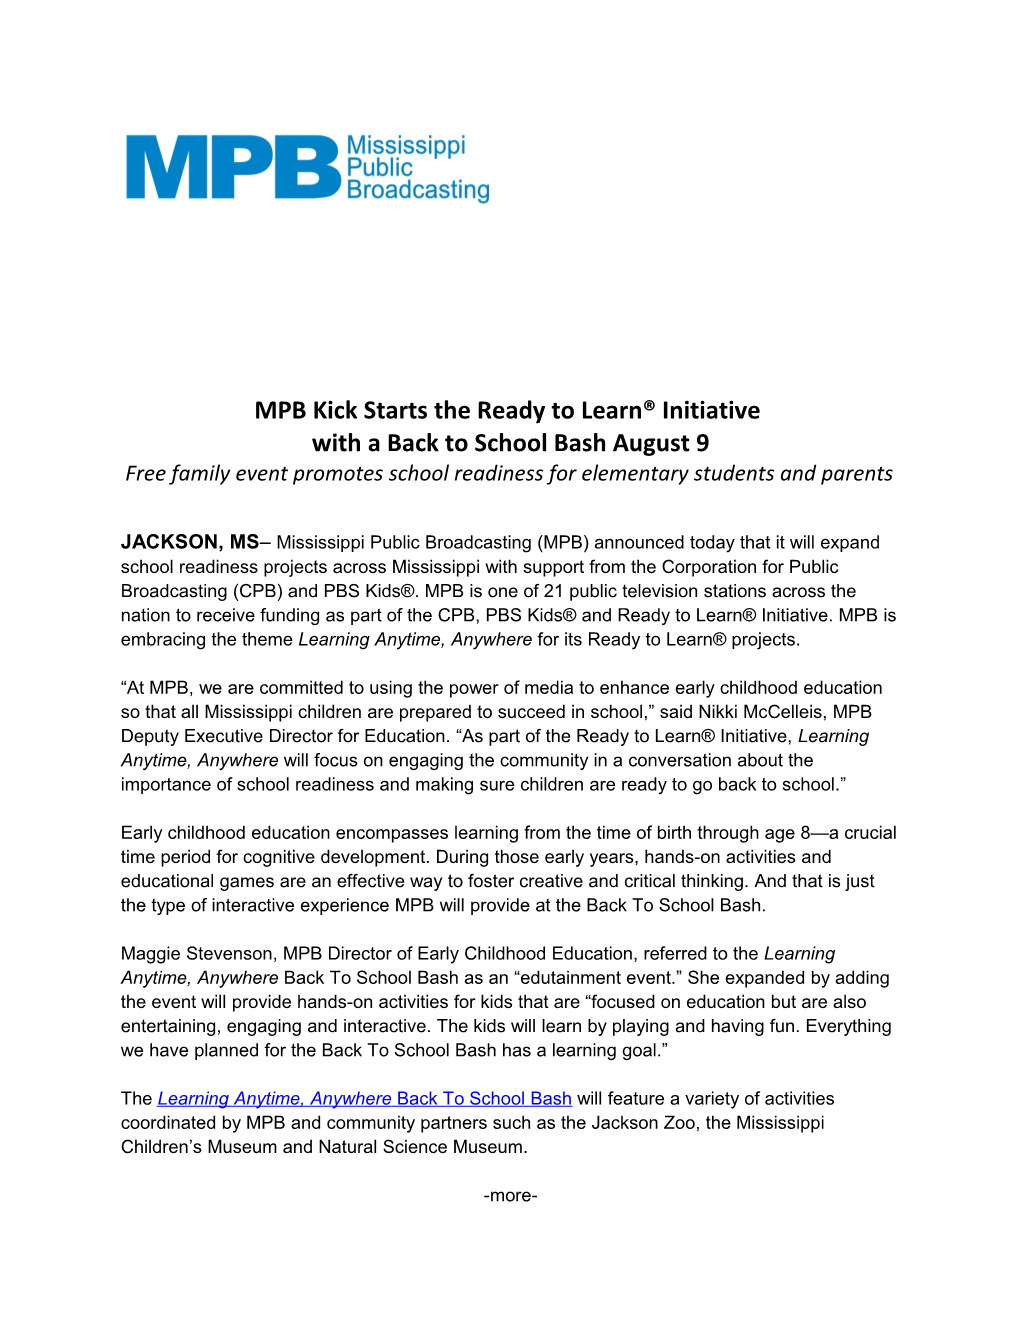 JACKSON, MS Mississippi Public Broadcasting (MPB) Announced Today That It Will Expand School